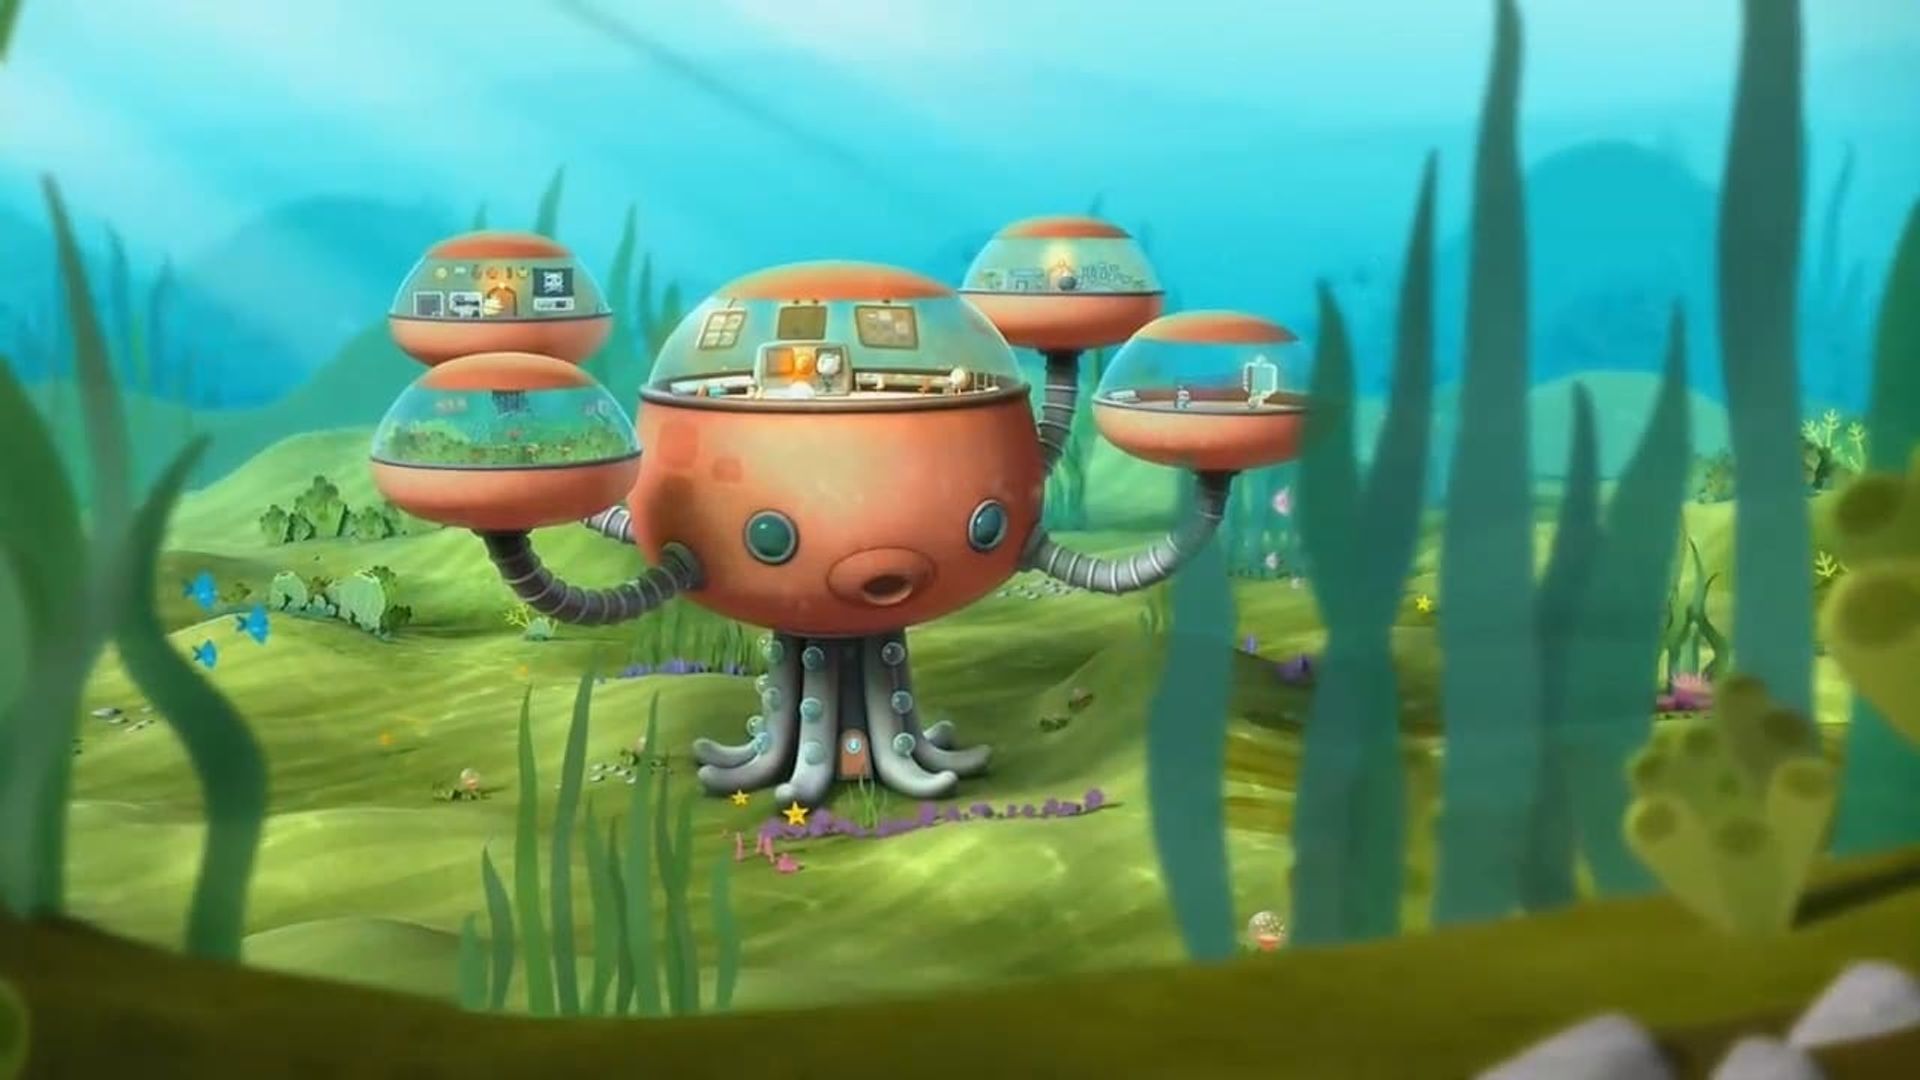 Octonauts & the Great Barrier Reef background